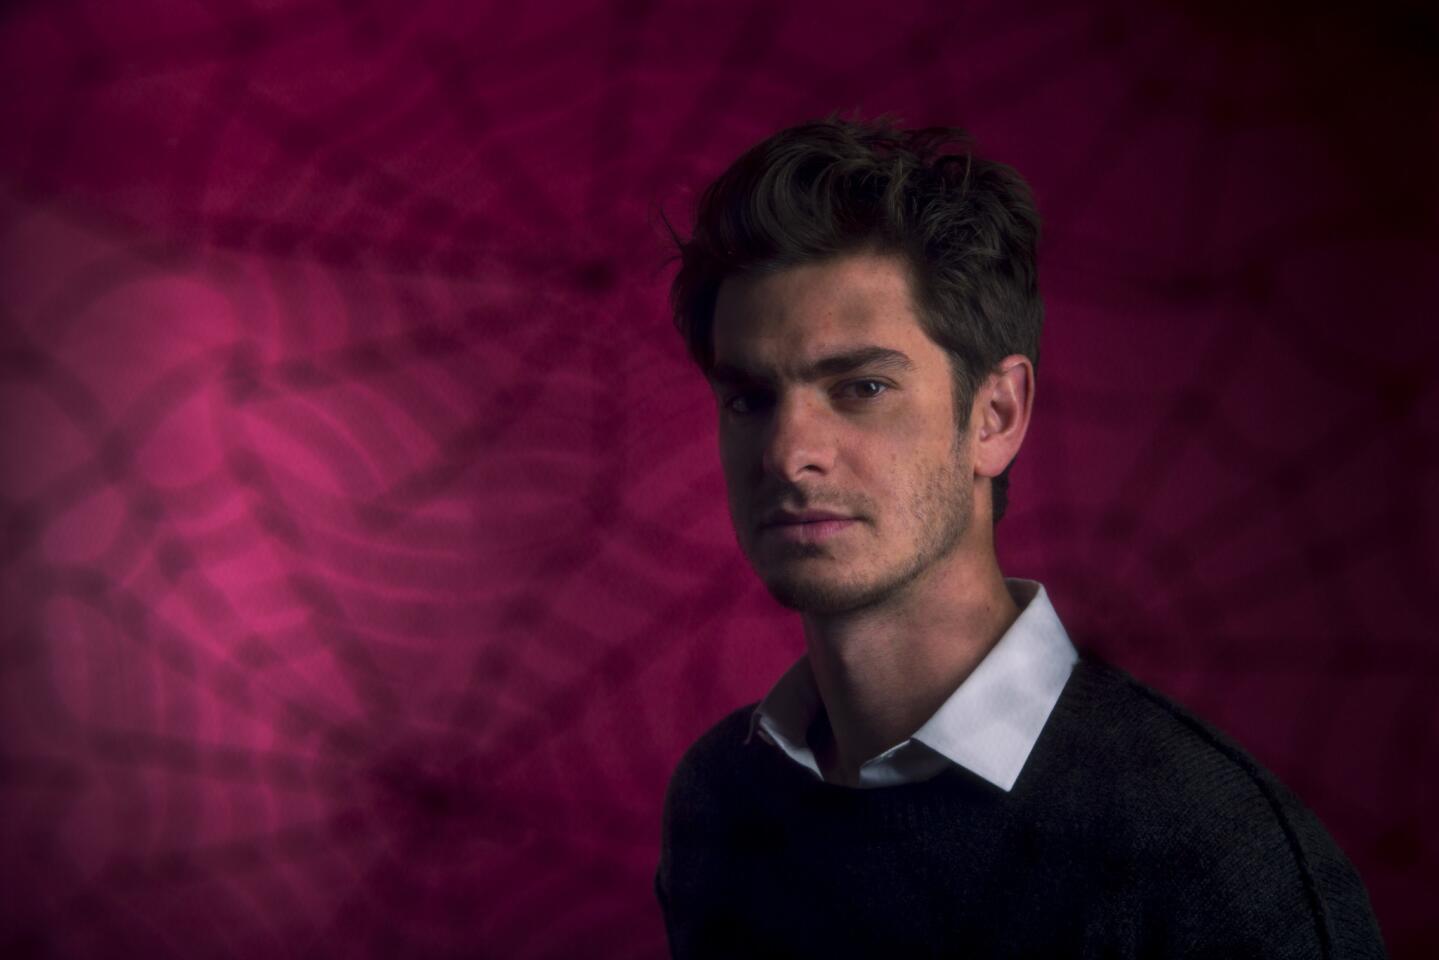 The 2012 movie "The Amazing Spider-Man" featured Andrew Garfield as the web-slinging superhero.